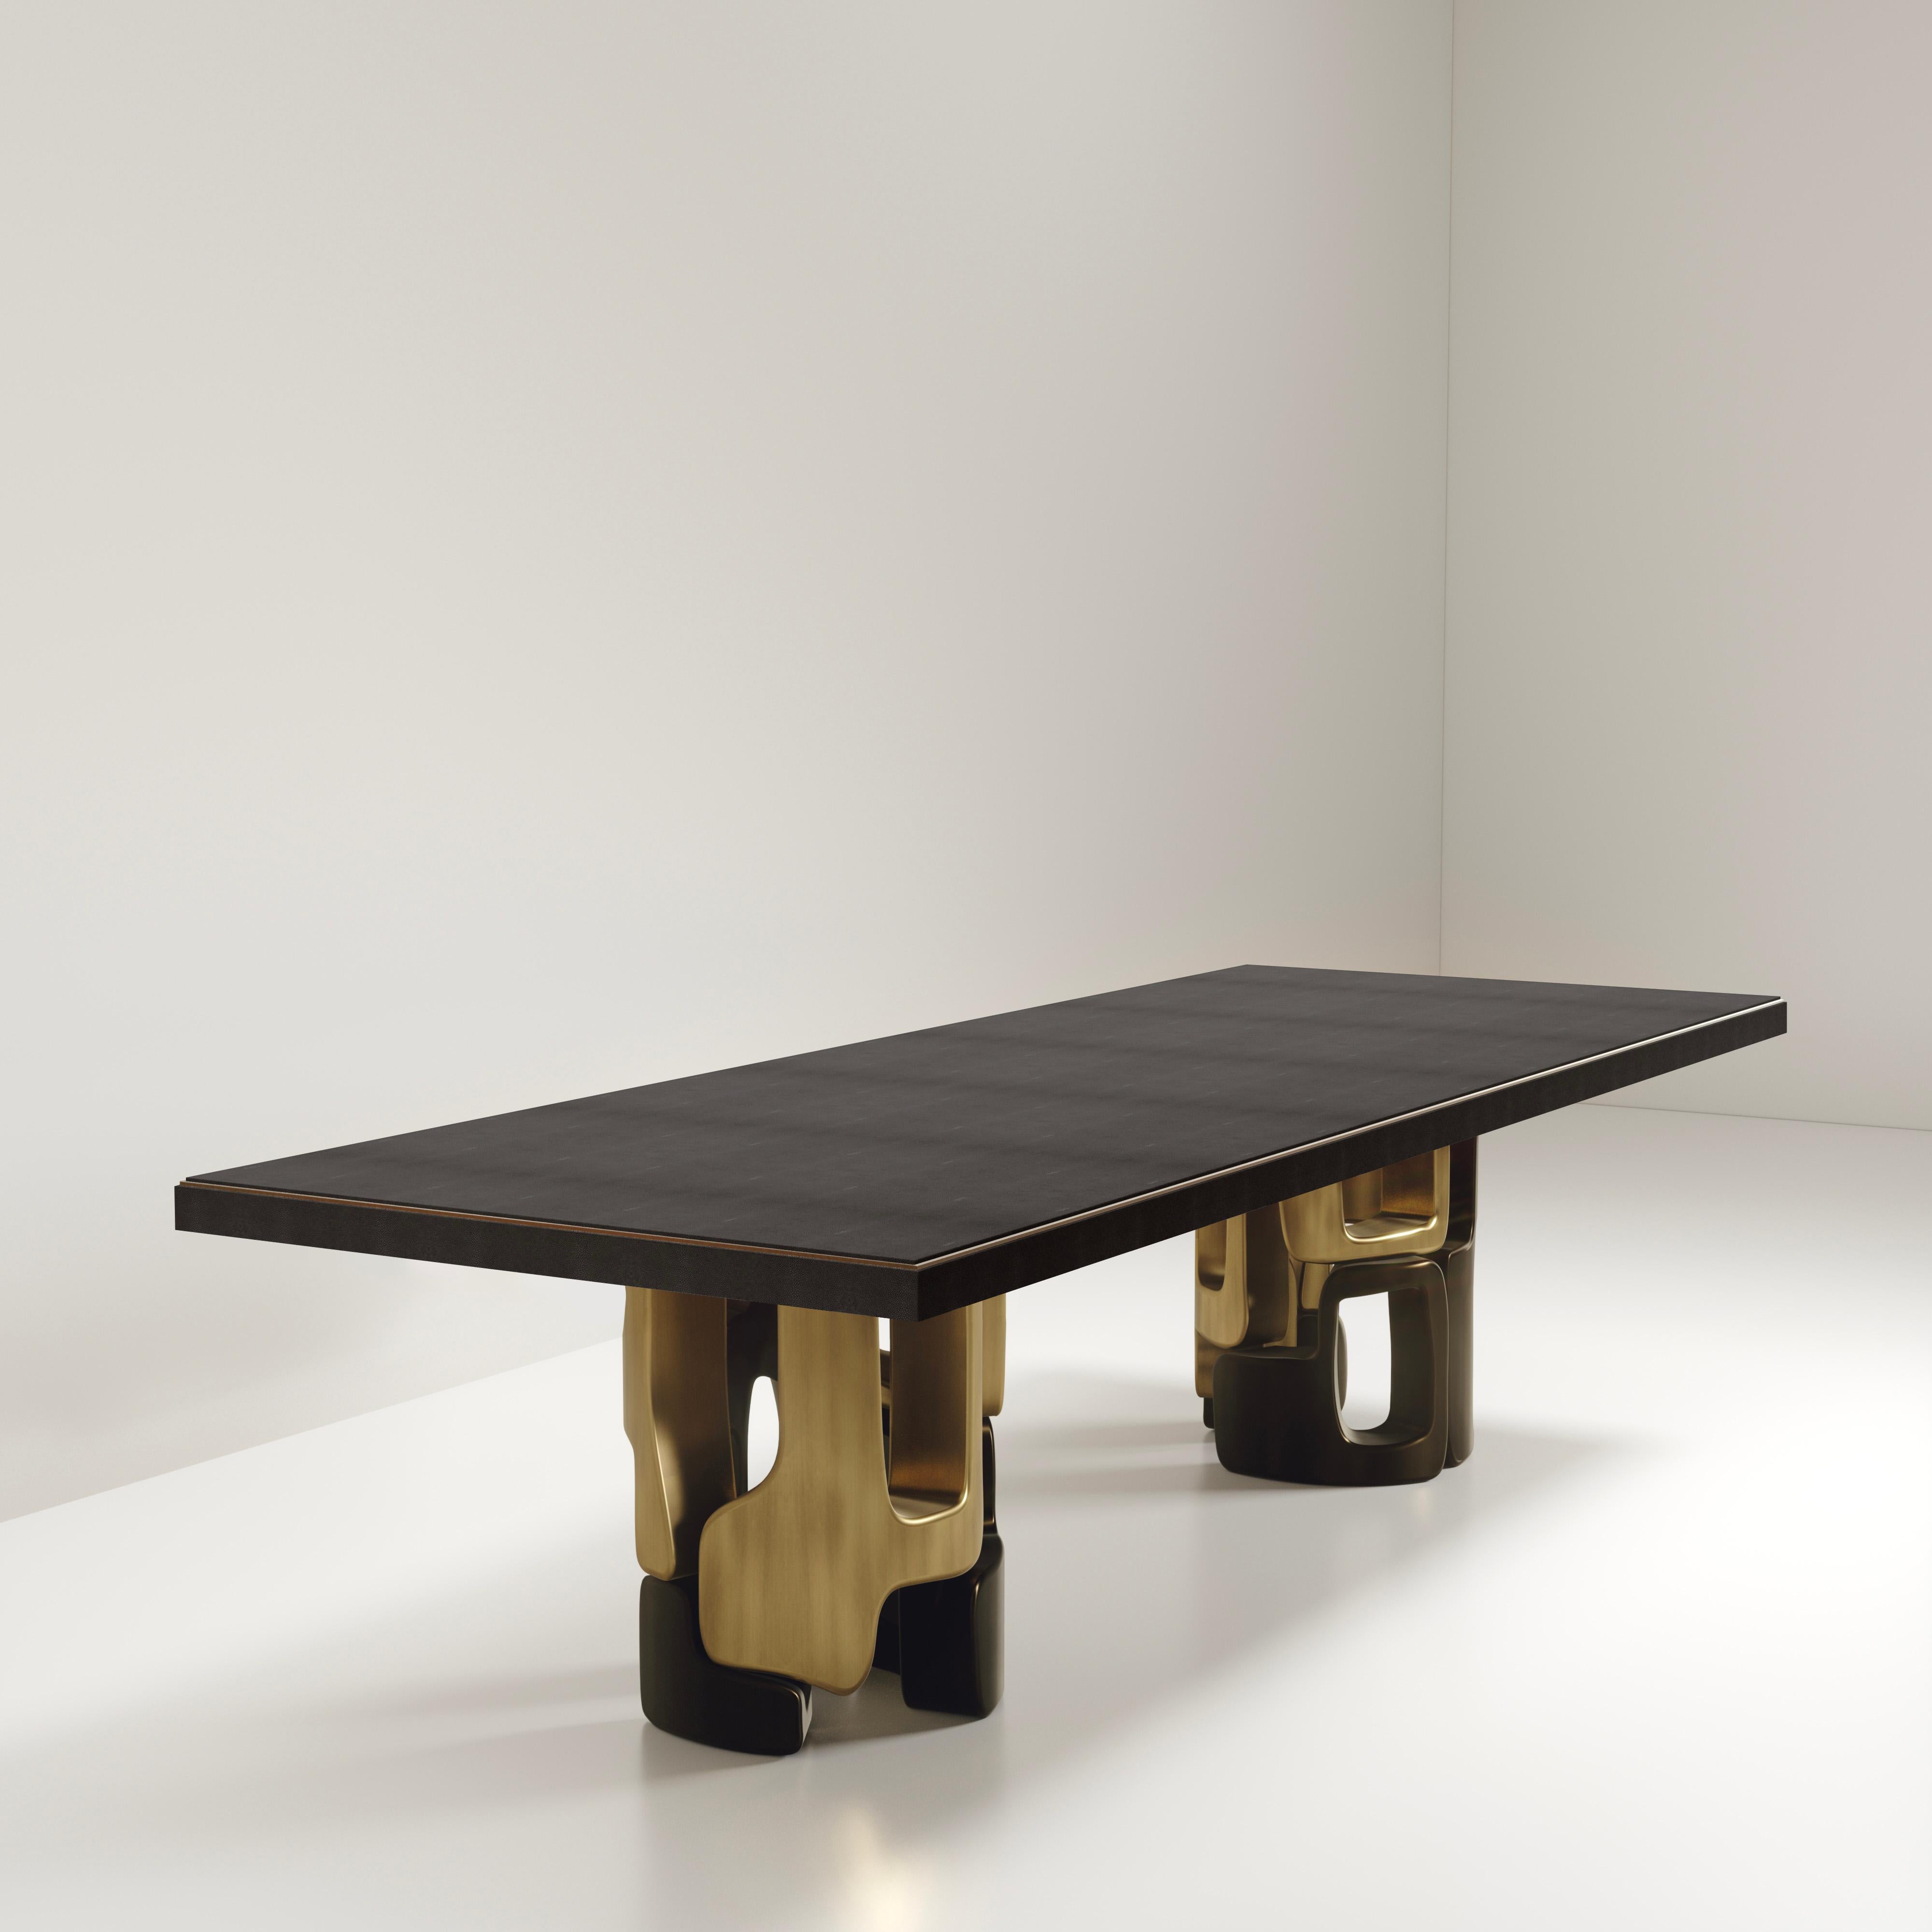 The Apoli I dining table by Kifu Paris is both dramatic and organic its unique design. The black shagreen inlaid top sits on a pair of geometric and sculptural bronze-patina brass bases. This piece is designed by Kifu Augousti the daughter of Ria